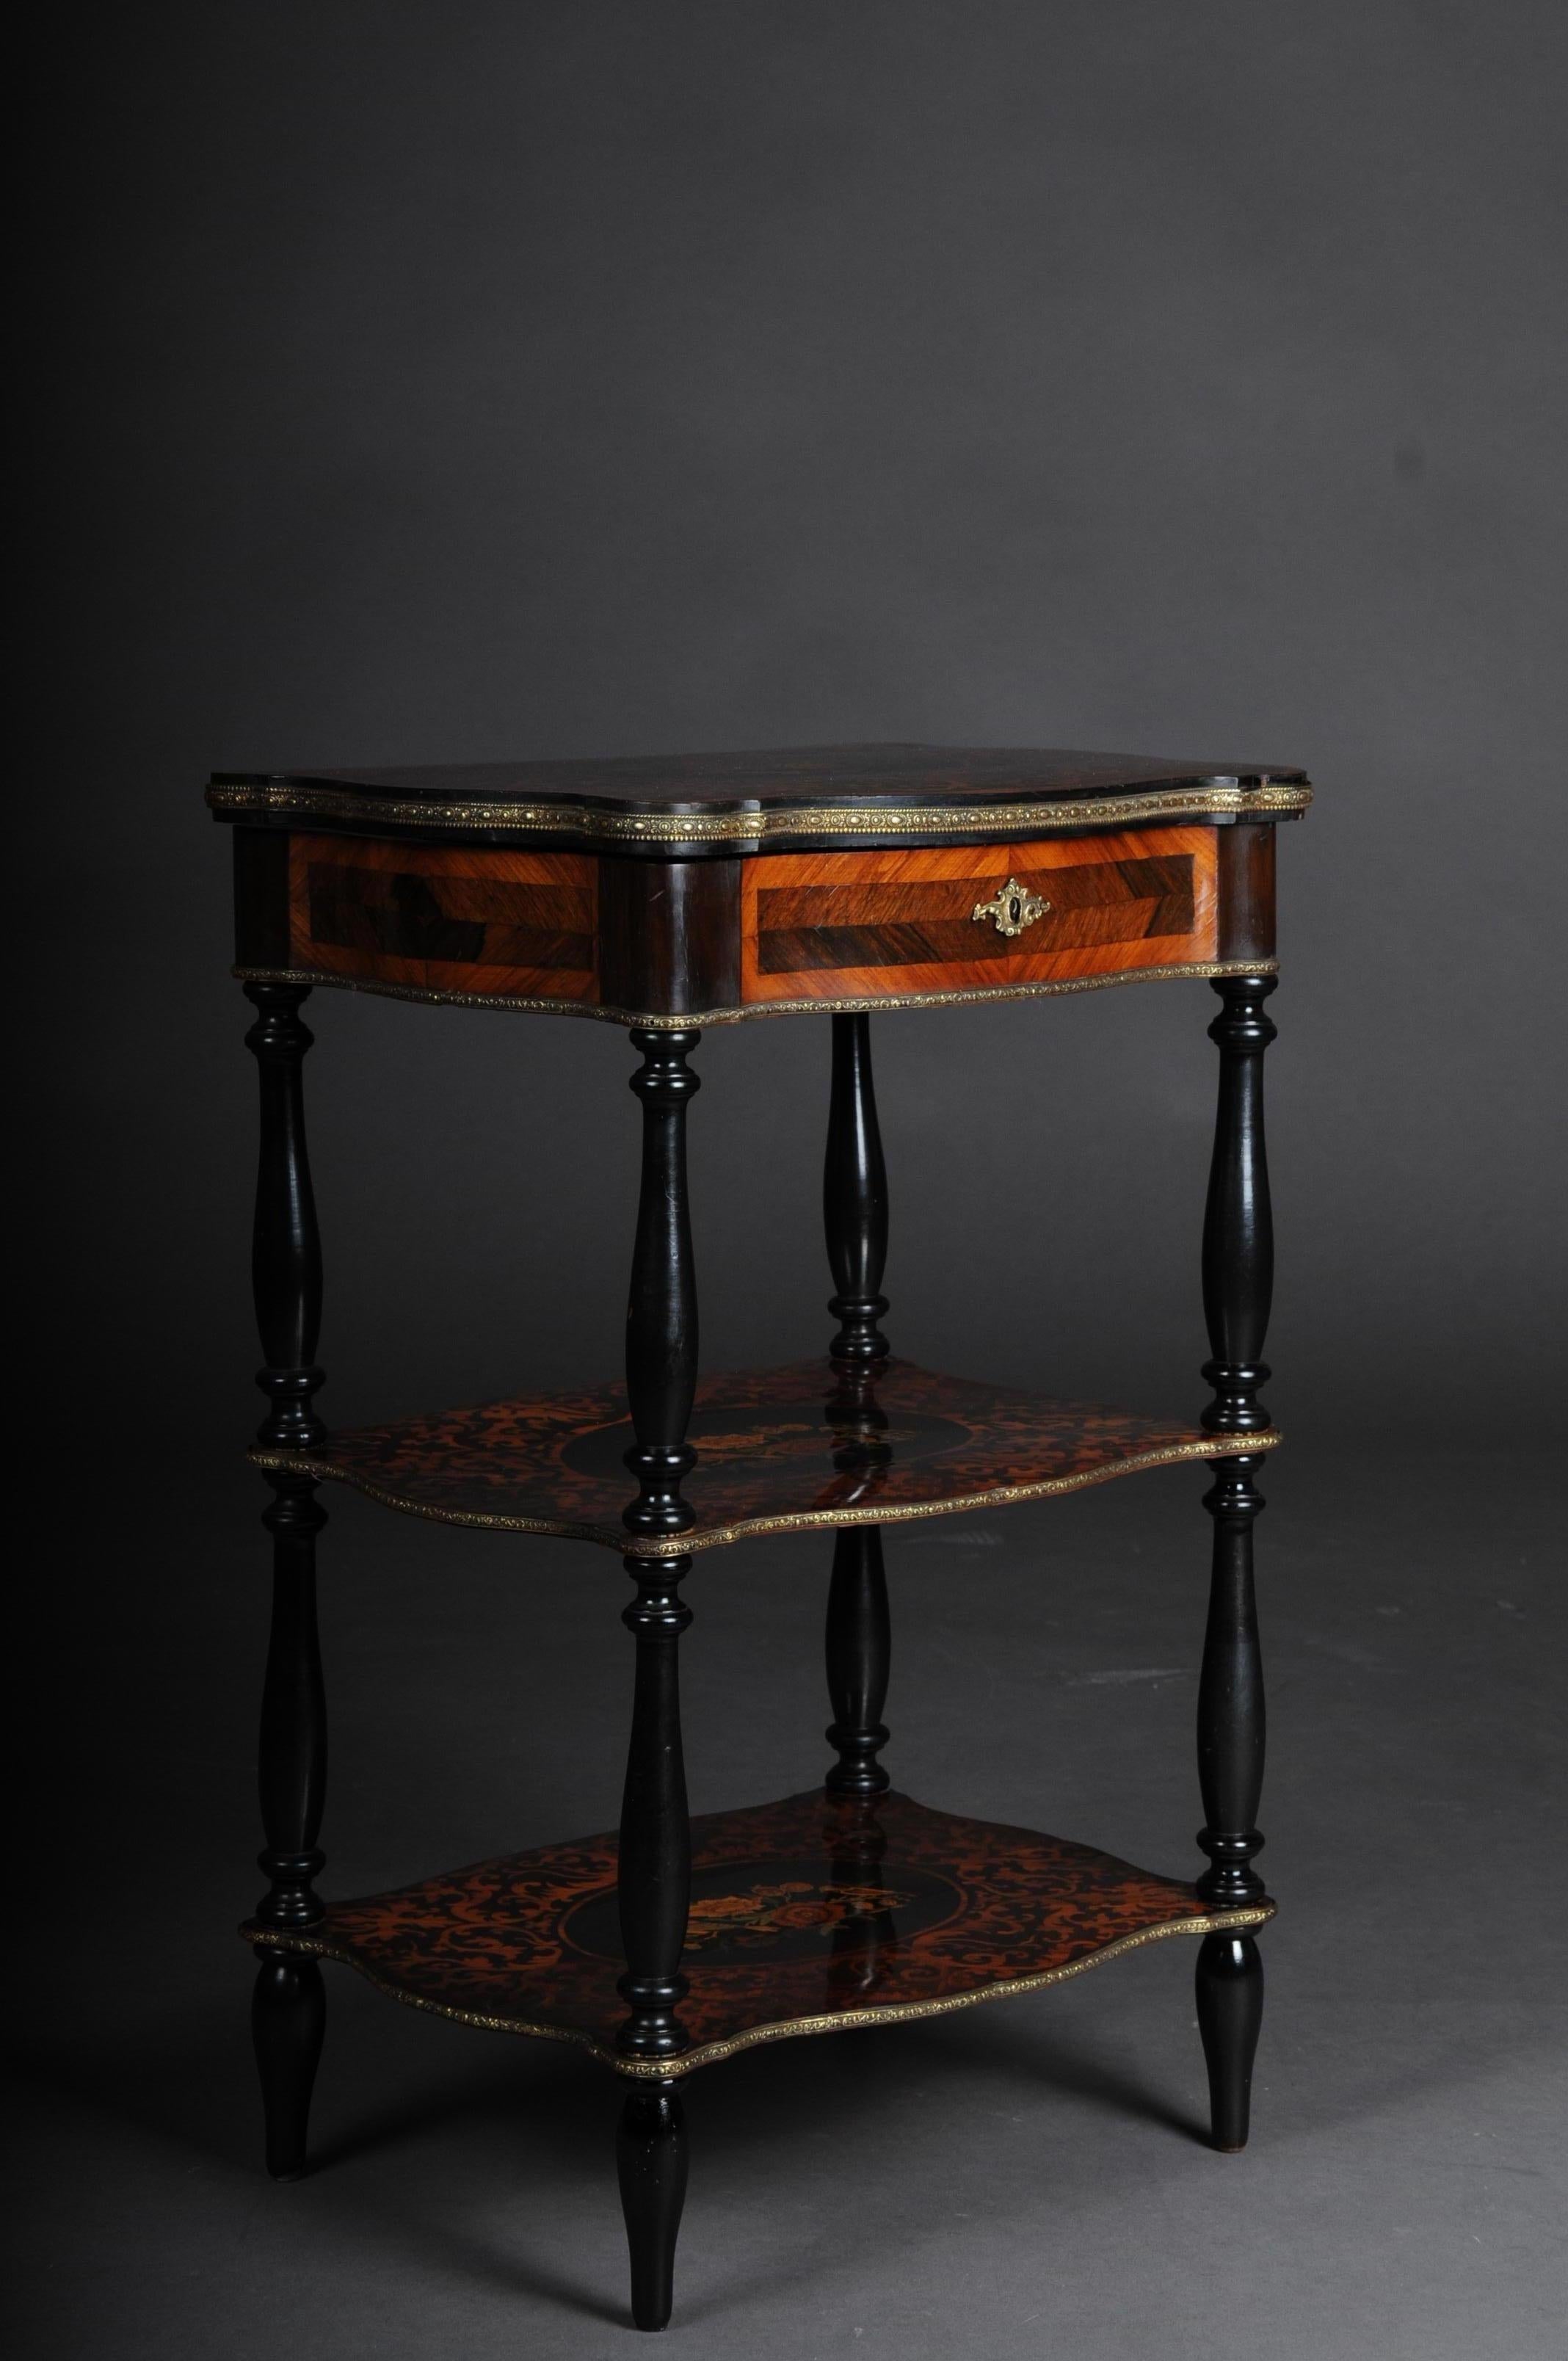 19th century Marquetry side table with jewelry box circa 1870

3-tier side table with decorative key function. Solid wood with exotic inlays, partially ebonized. Rectangular body framed with brass fittings flanked by 4 blackened full columns.